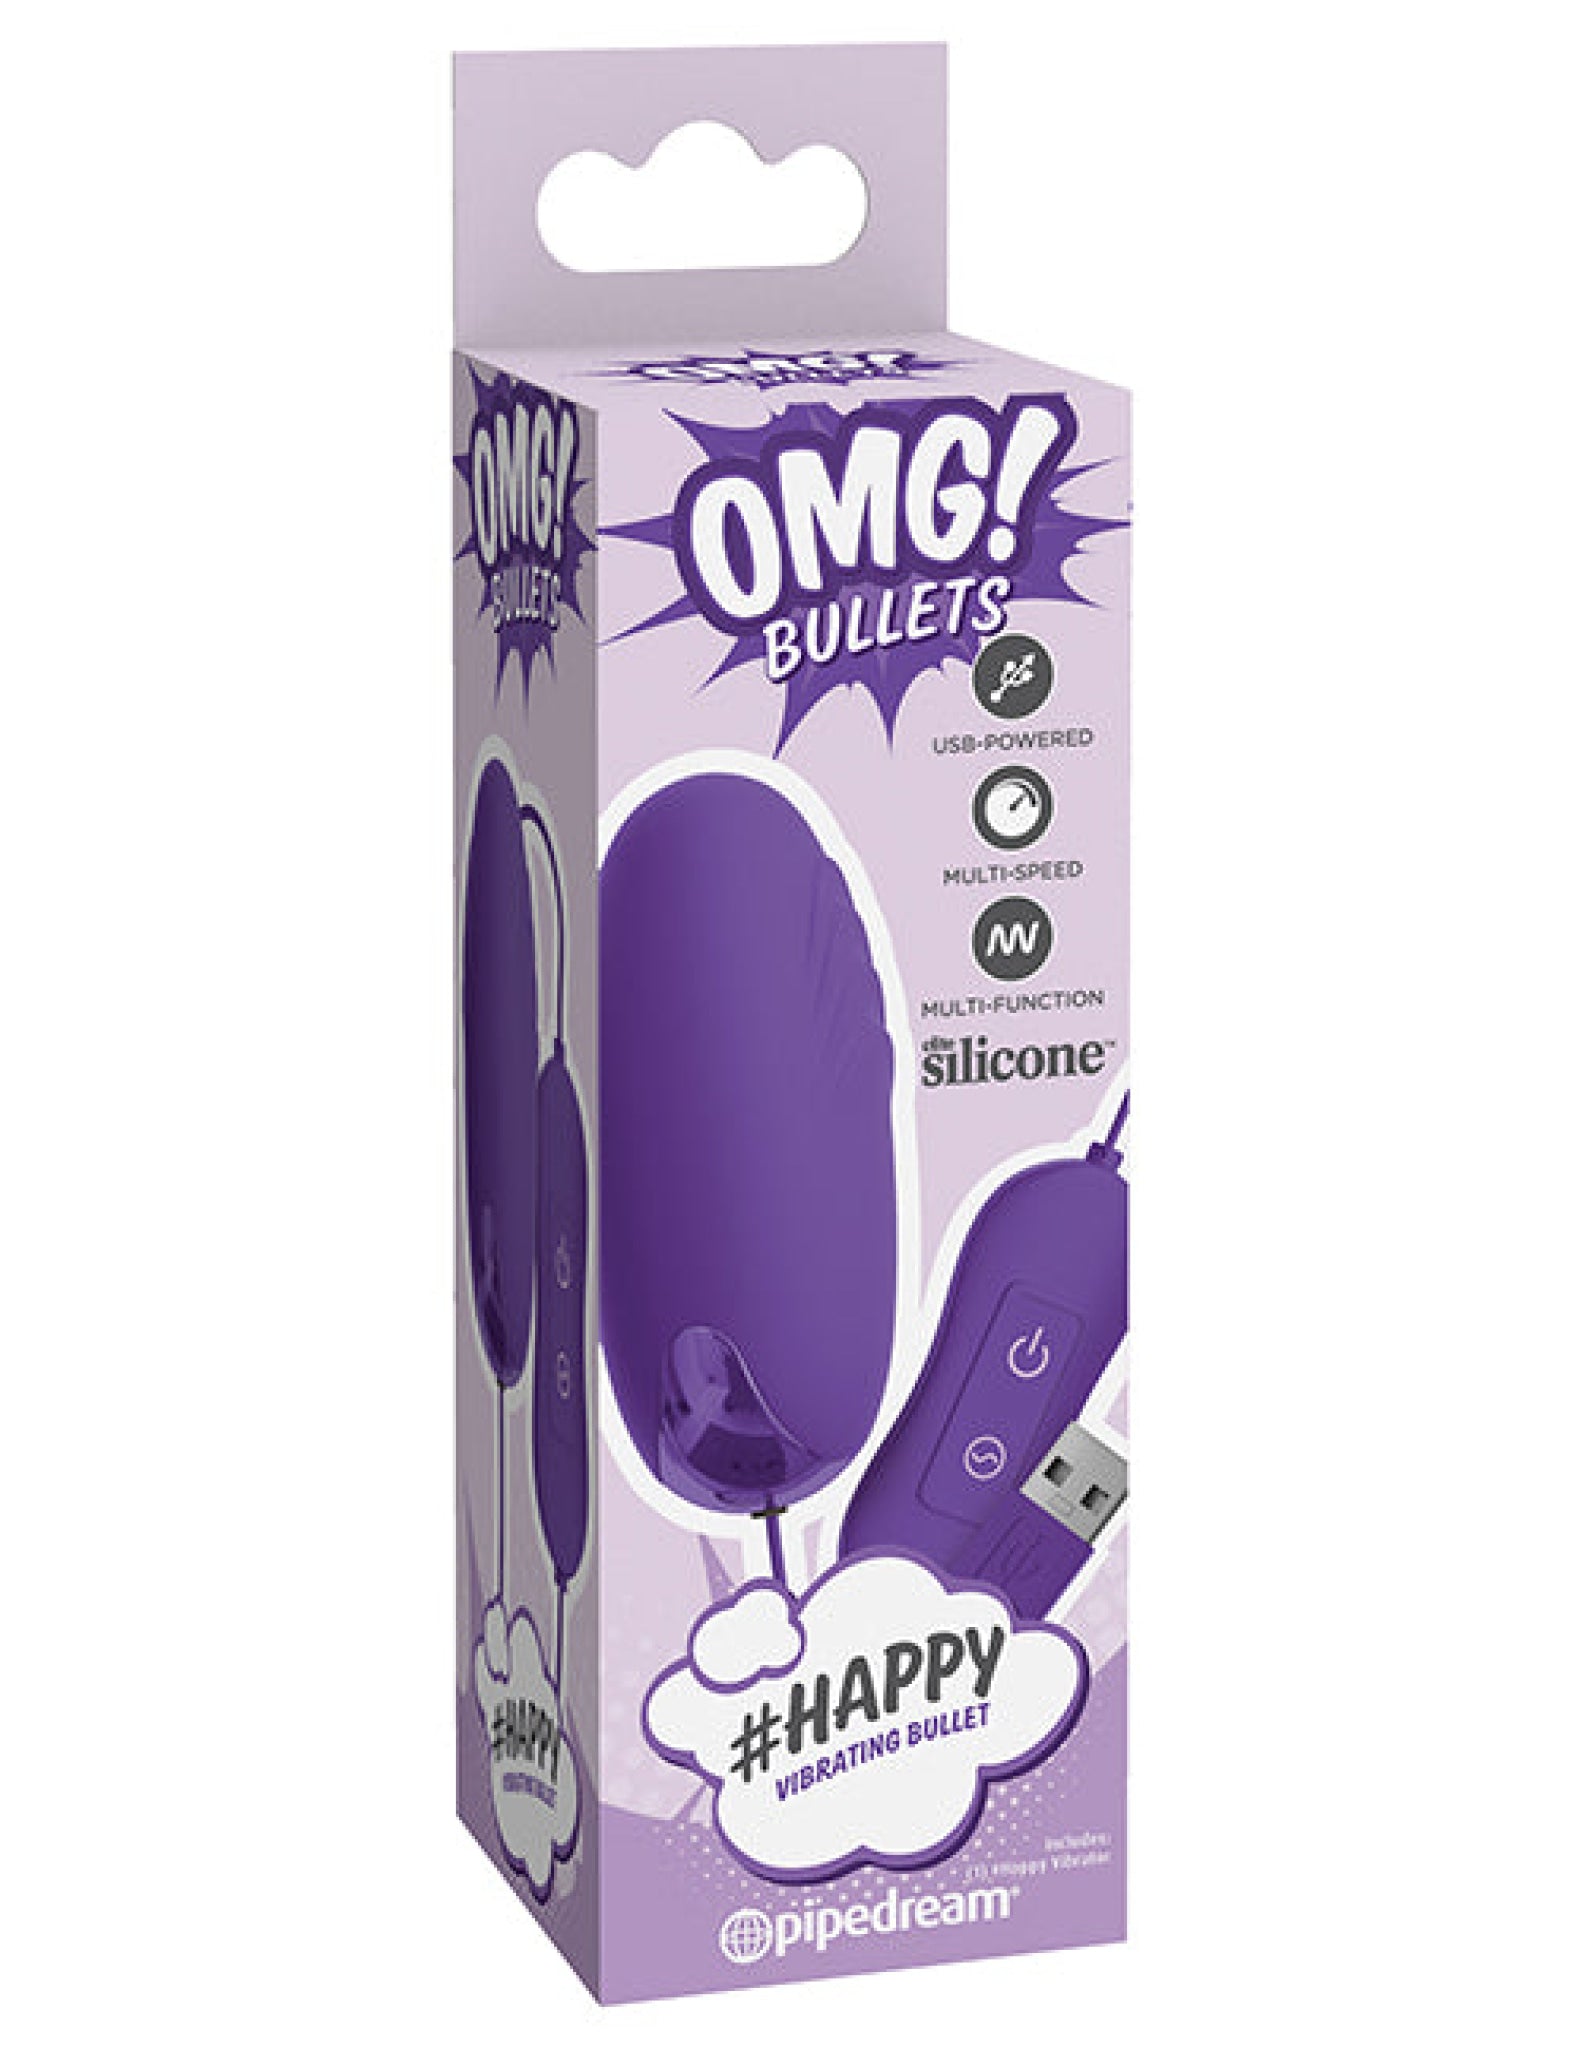 Omg! Bullets (hash Tag) Happy  - Purple Pipedream®